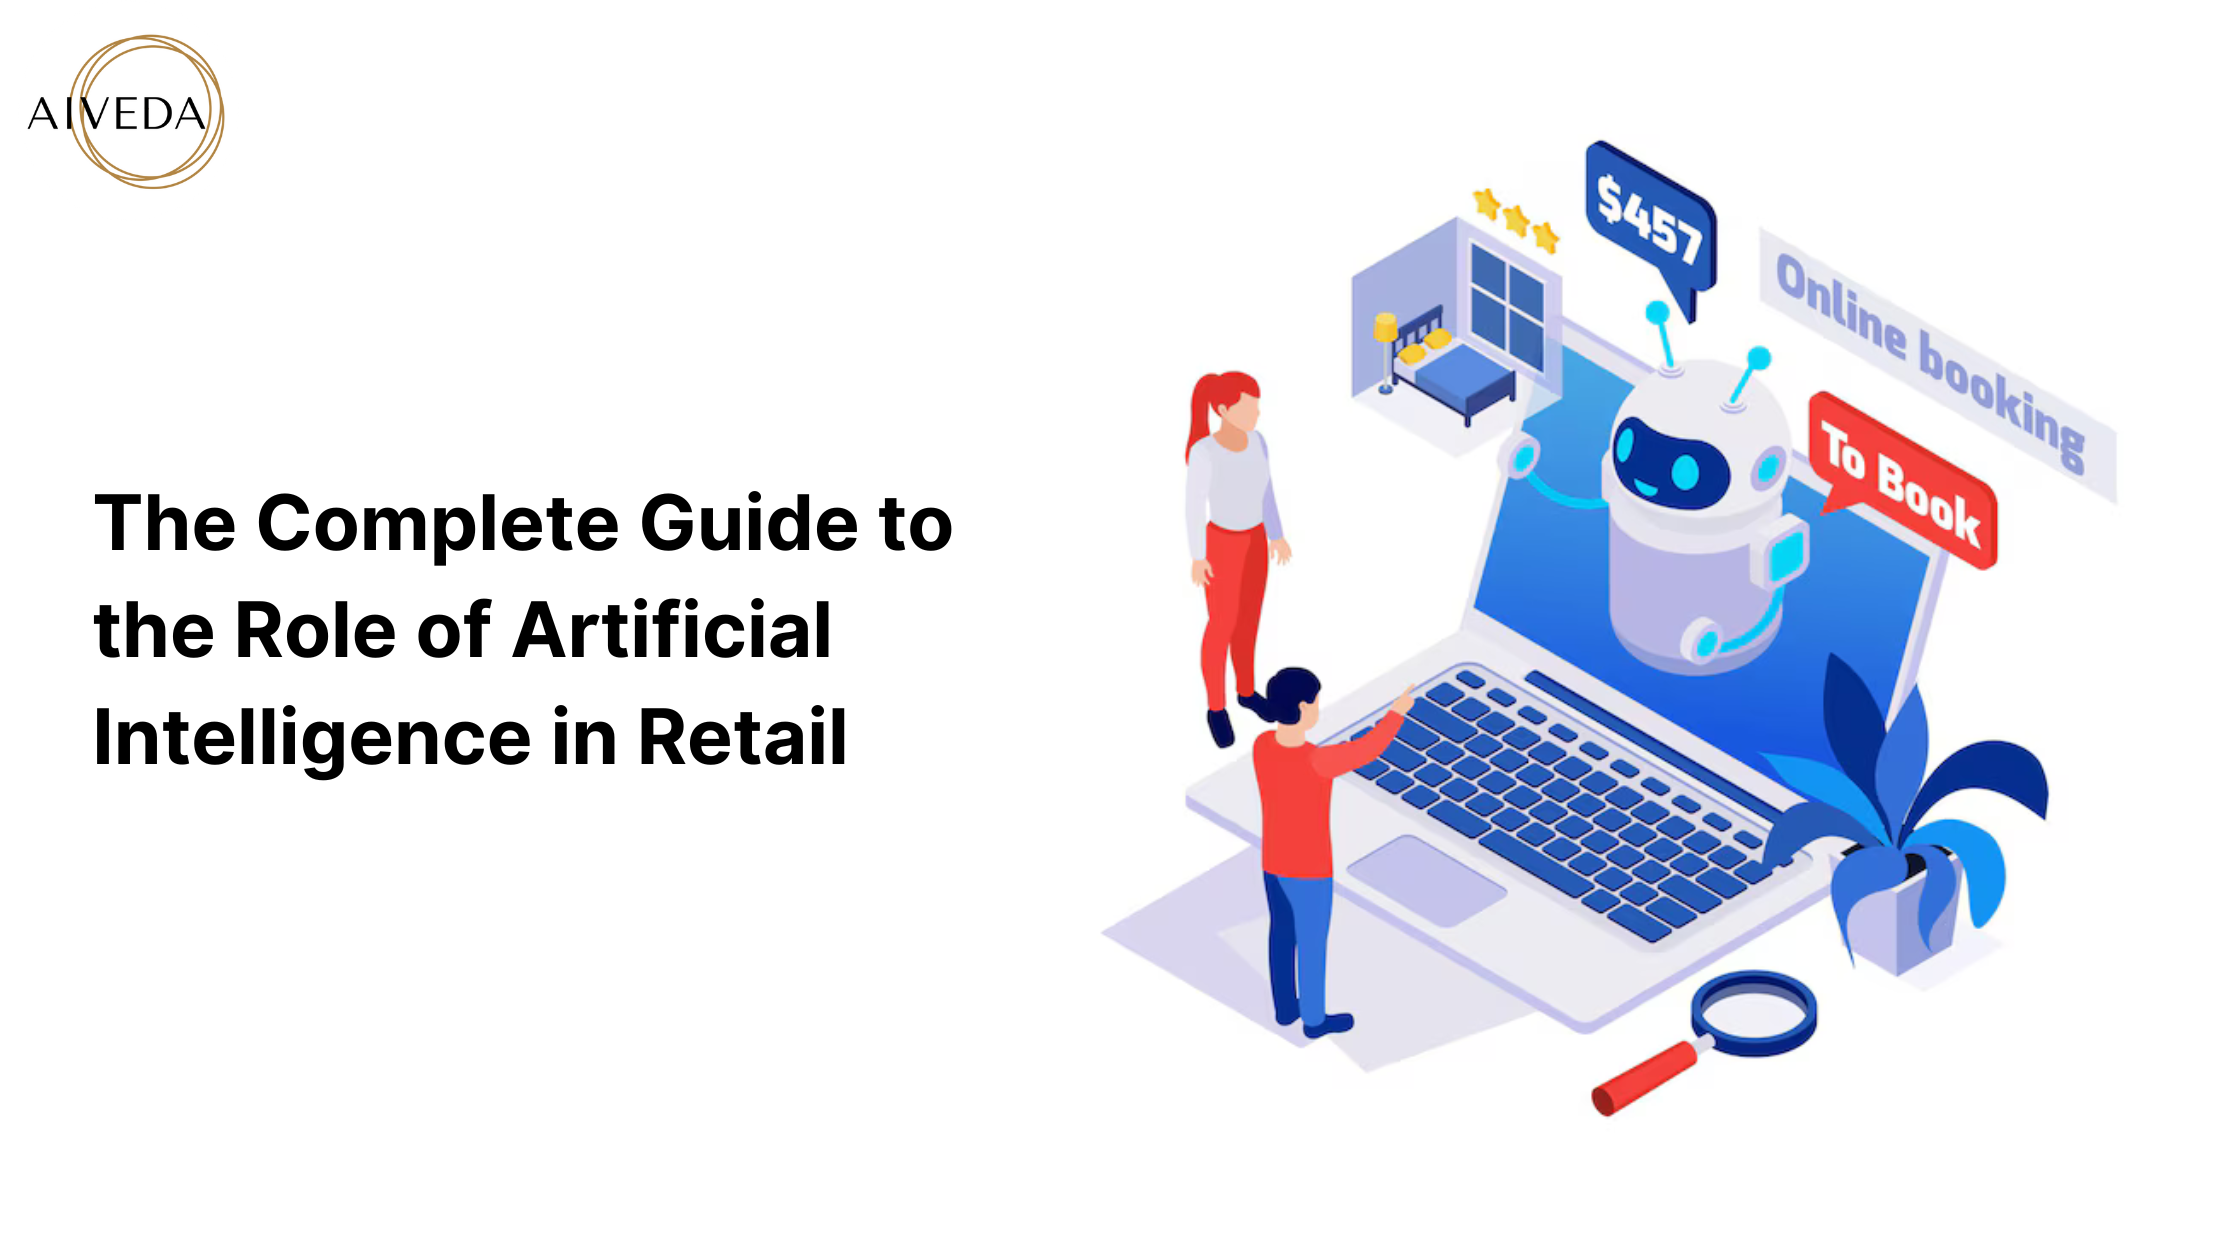 The Complete Guide to the Role of Artificial Intelligence in Retail - AIVeda